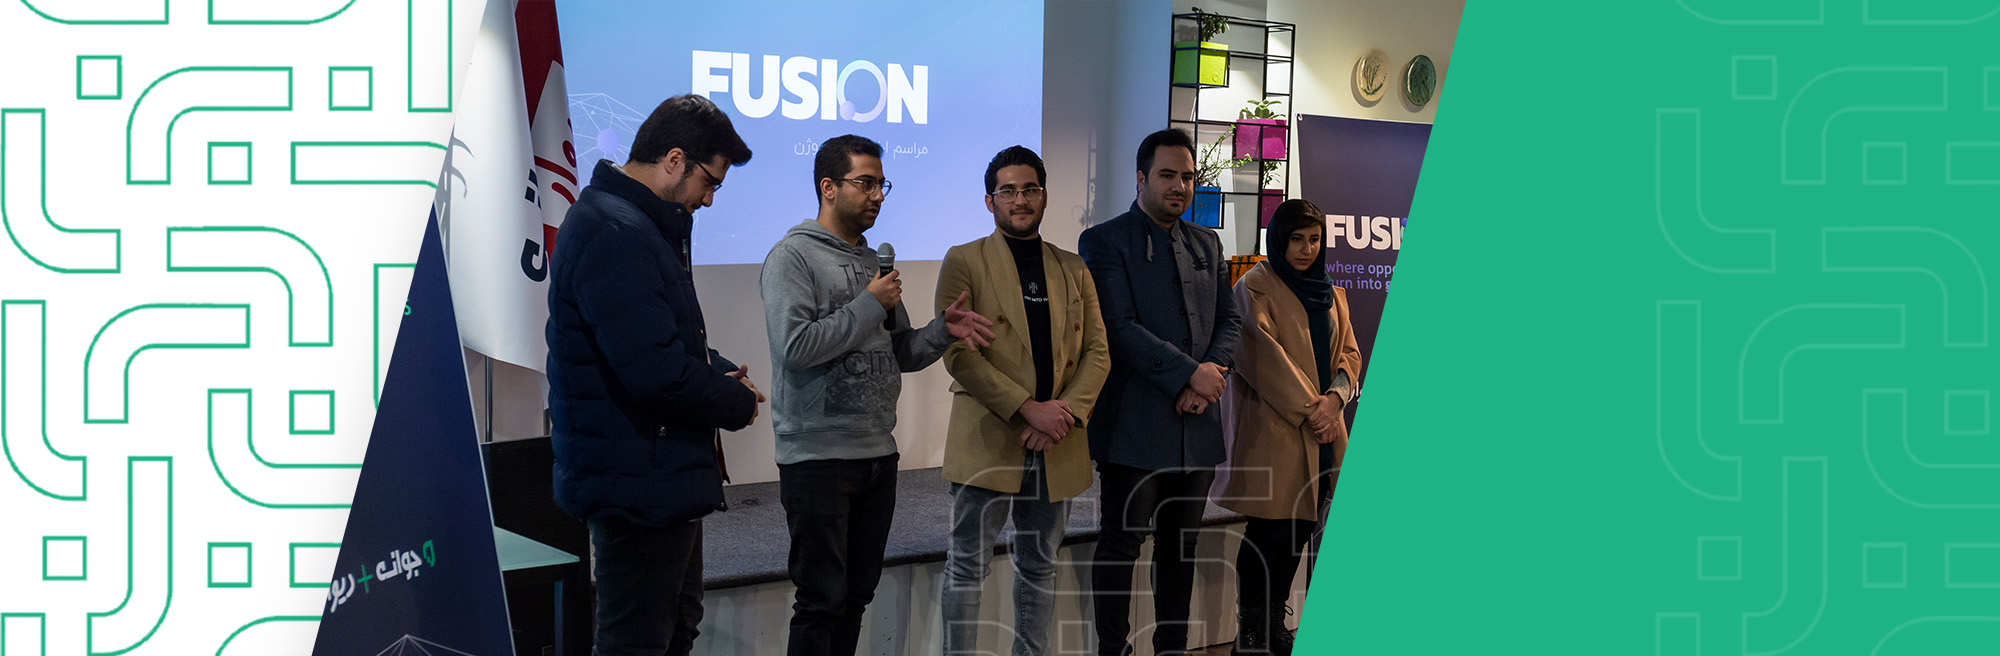 Fusion Final Event